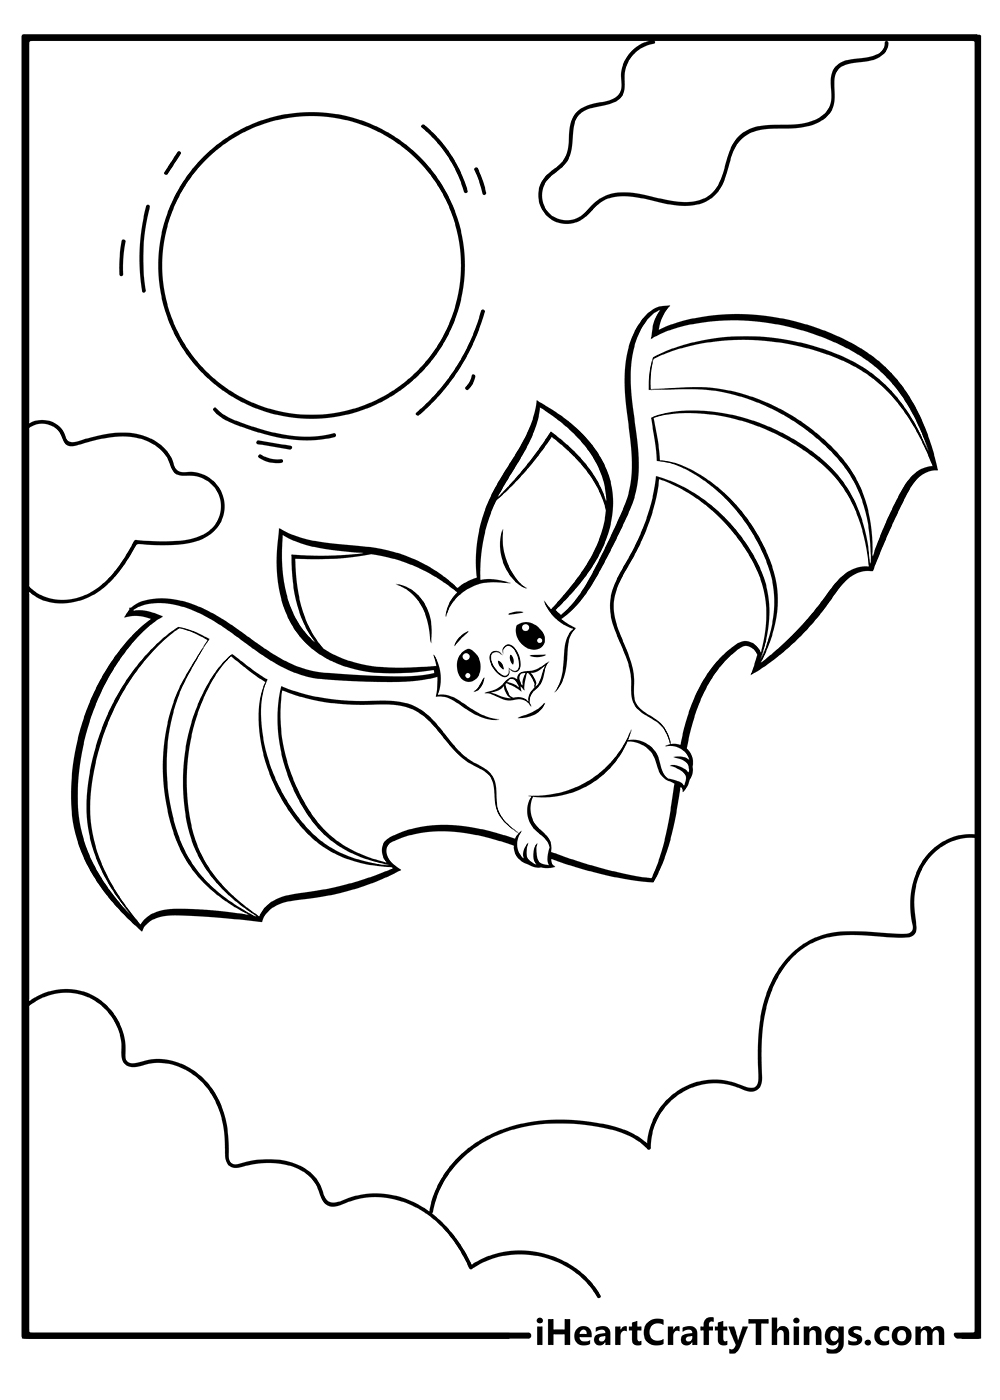 Bat Coloring Pages for kids